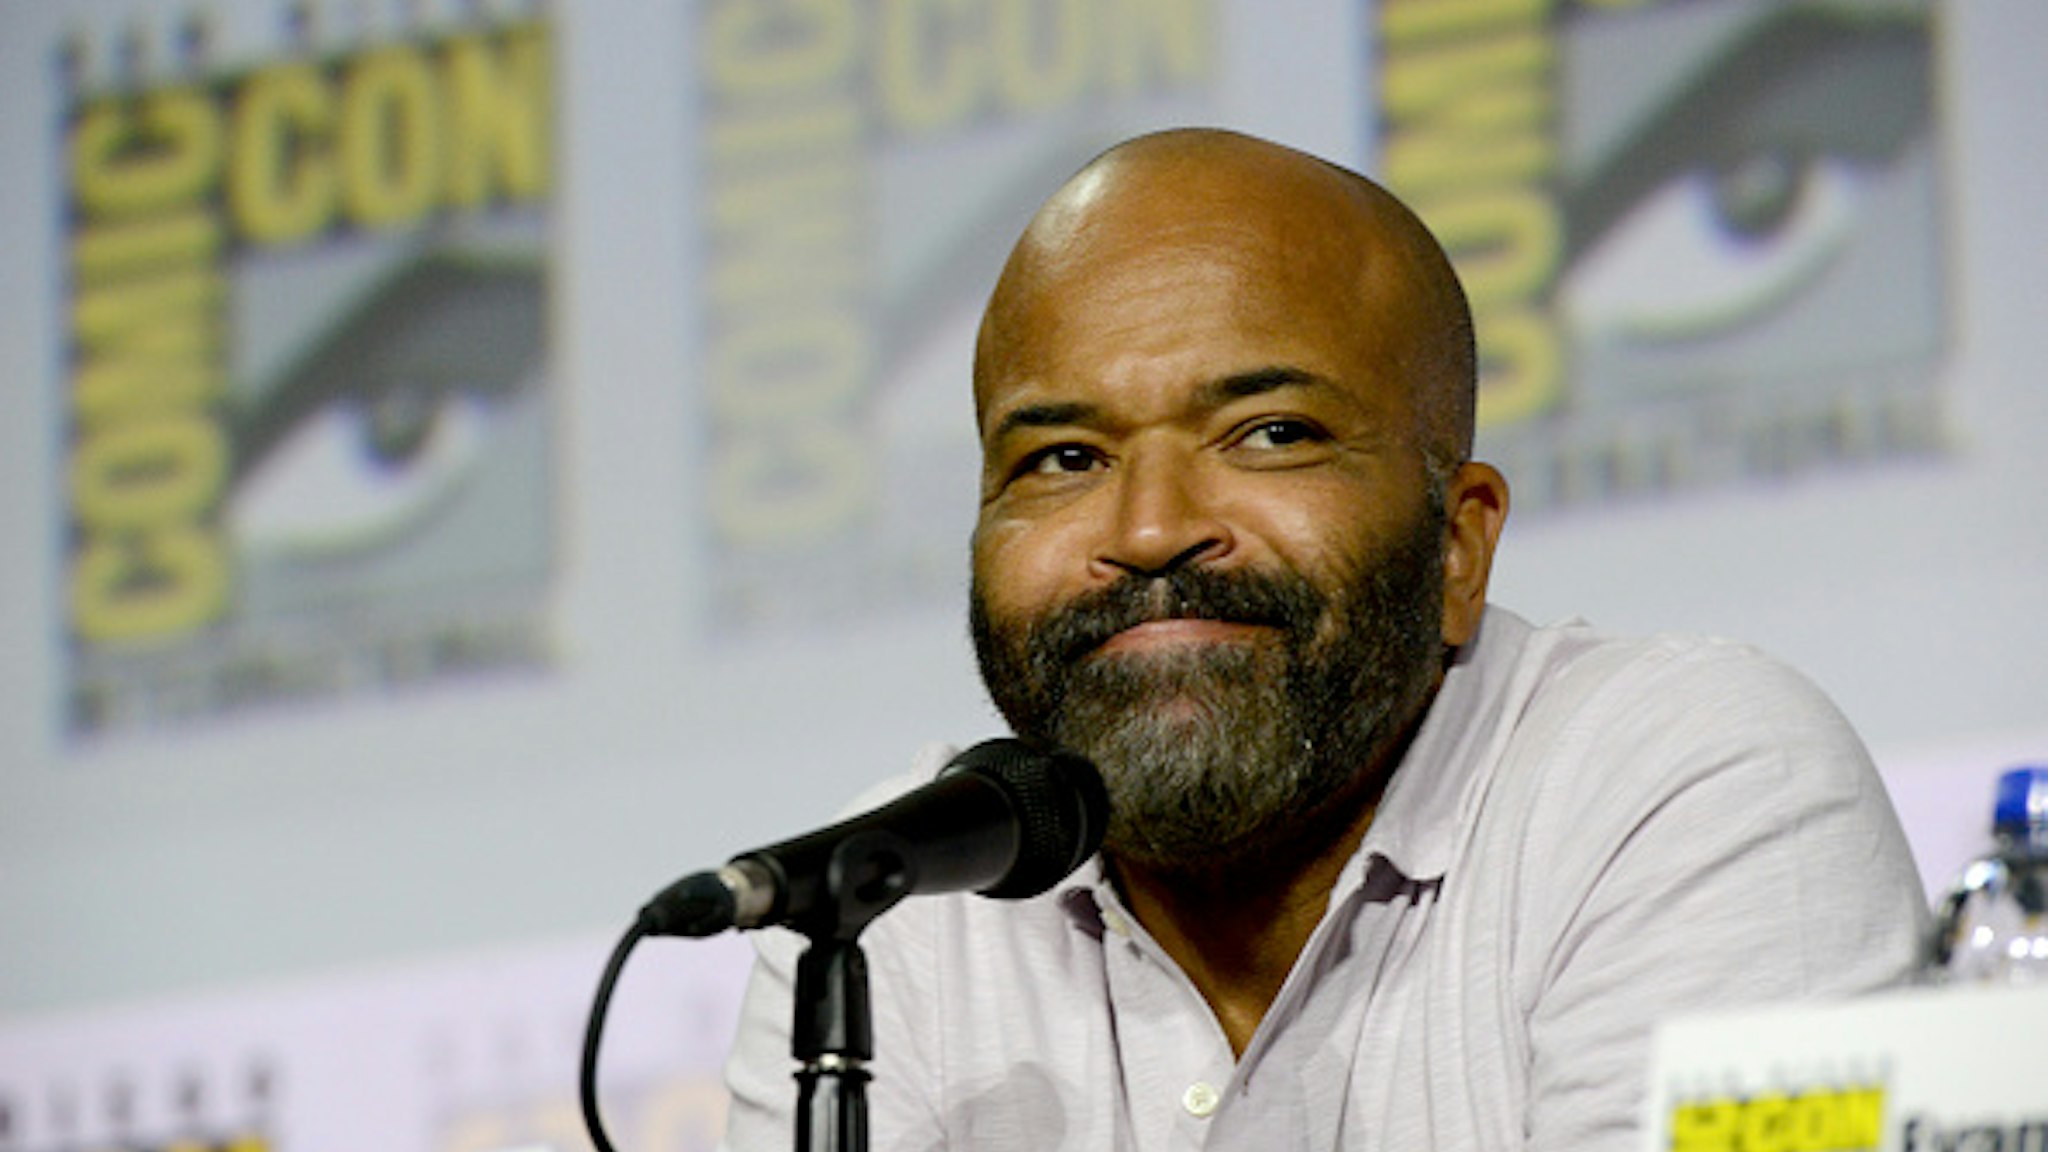 SAN DIEGO, CALIFORNIA - JULY 20: Jeffrey Wright speaks at the "Westworld III" Panel during 2019 Comic-Con International at San Diego Convention Center on July 20, 2019 in San Diego, California.